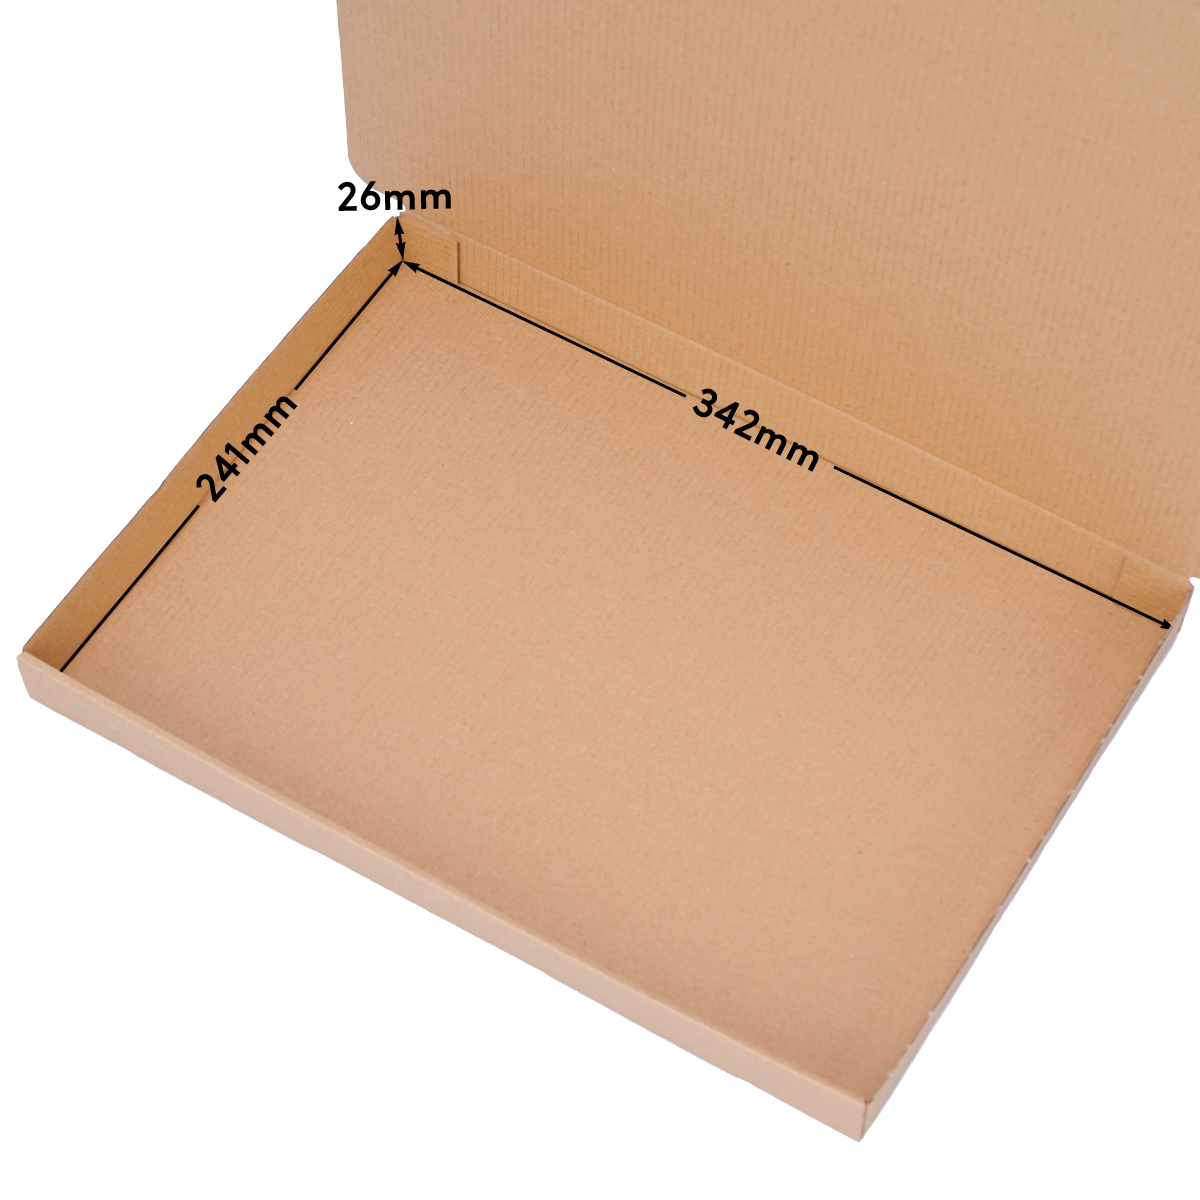 Letter-sized maxi-carton 350 x 250 x 30 mm - WP-XS, brown